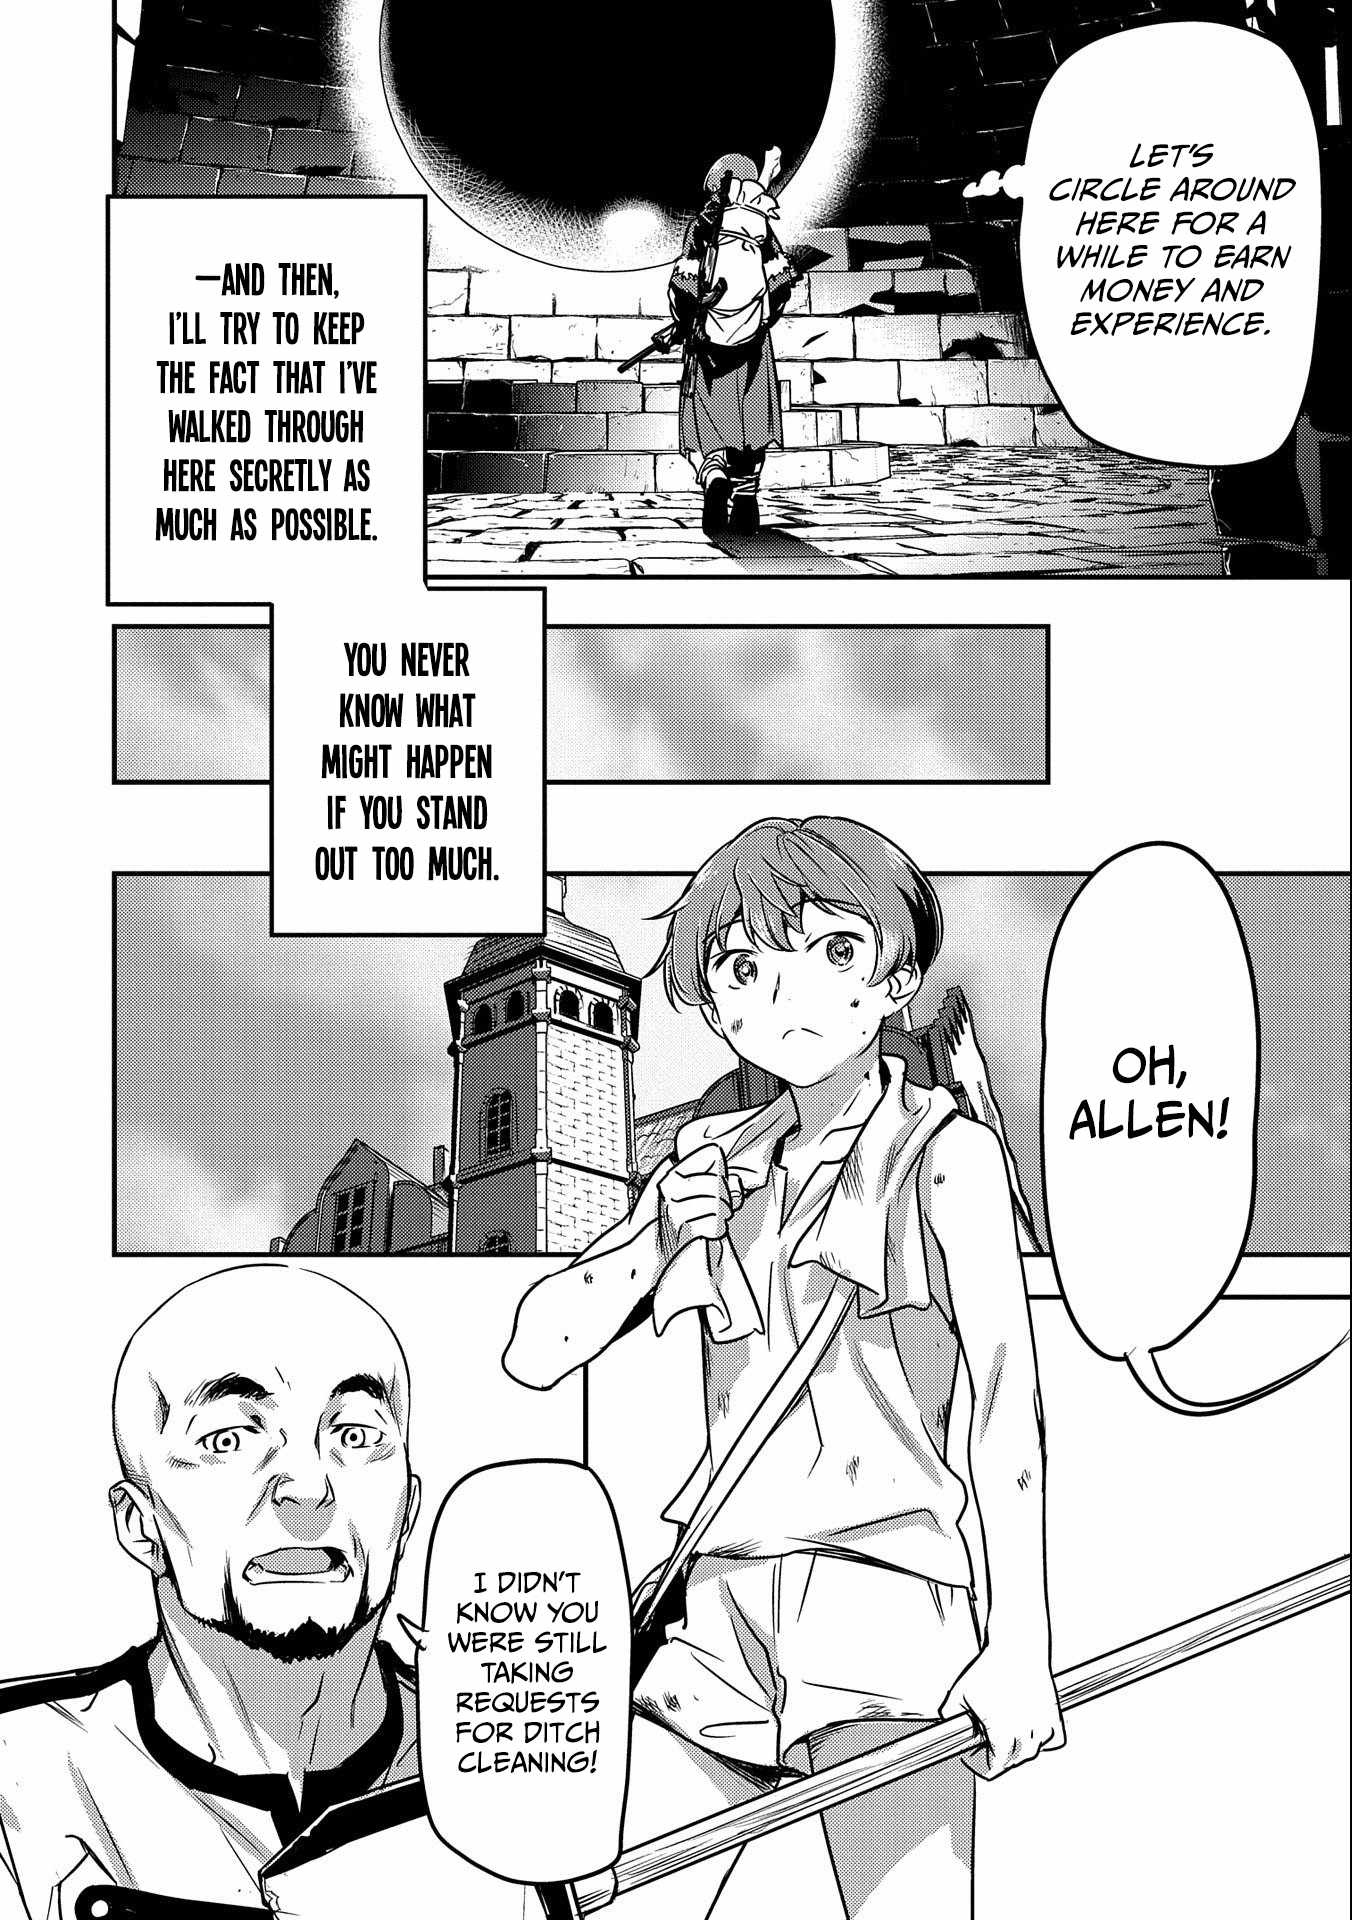 Villager A Wants to Save the Villainess no Matter What! Chapter 13 - Page 24